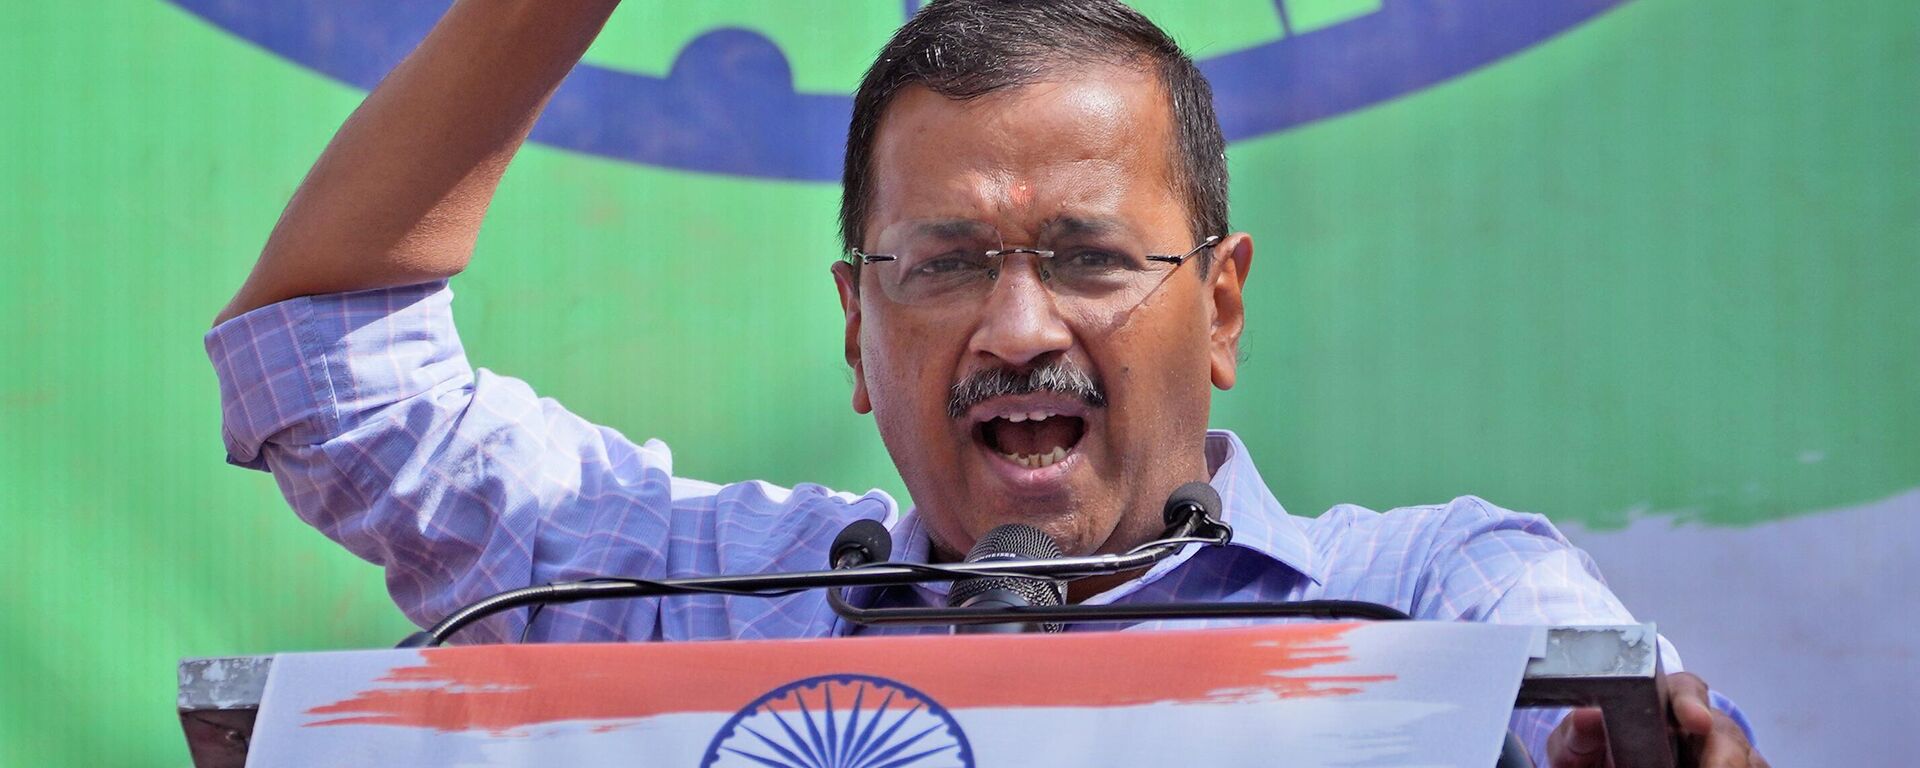 Delhi state Chief minister and chief of Aam Aadmi Party Arvind Kejriwal speaks during celebrations at the party headquarters in New Delhi, Thursday, March 10, 2022 - Sputnik International, 1920, 11.11.2022